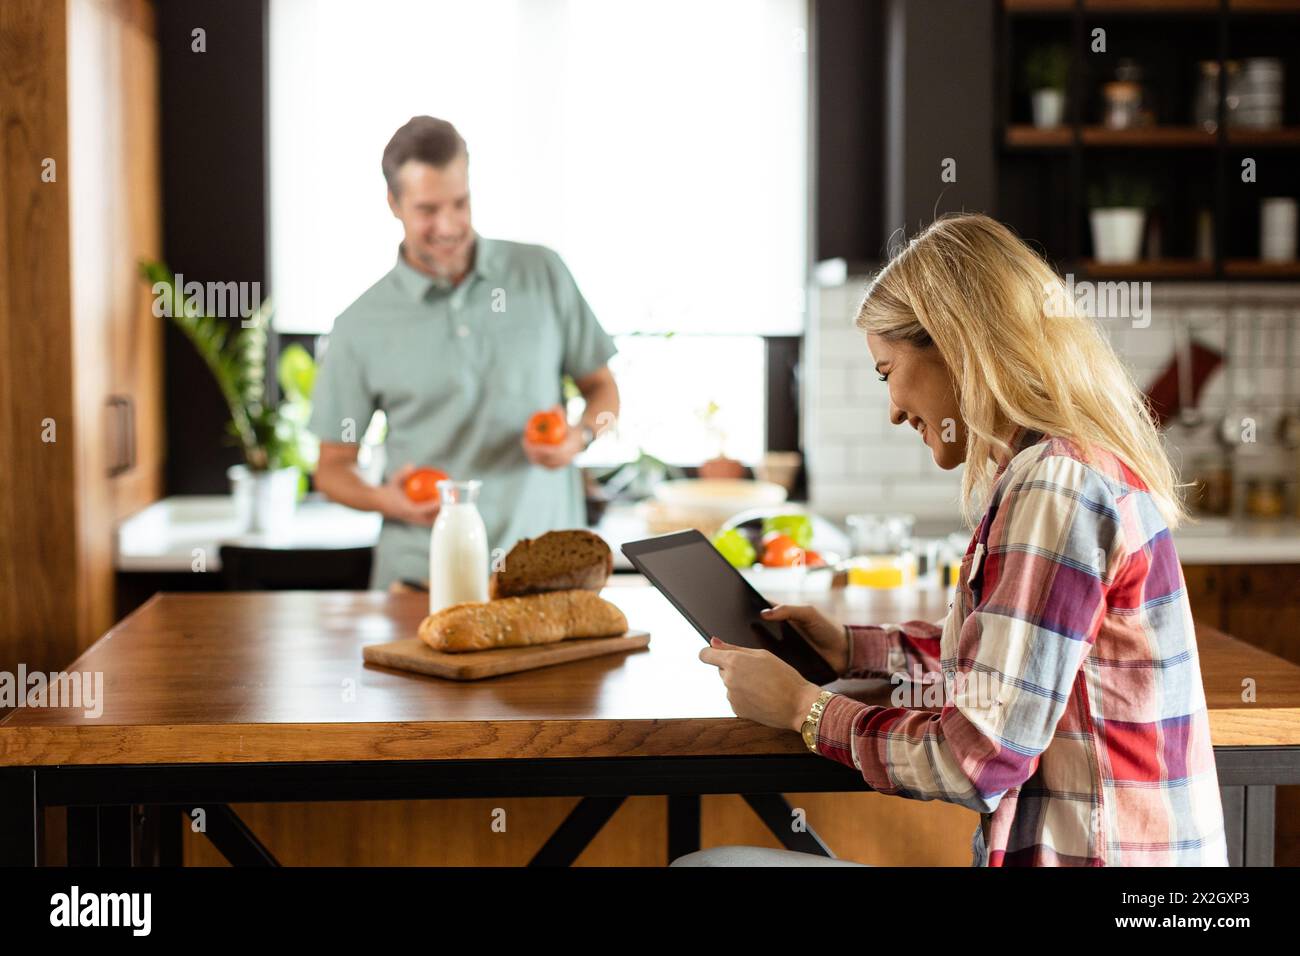 Woman reads from a tablet at the kitchen counter while a man holding an tomatoes smiles at her Stock Photo